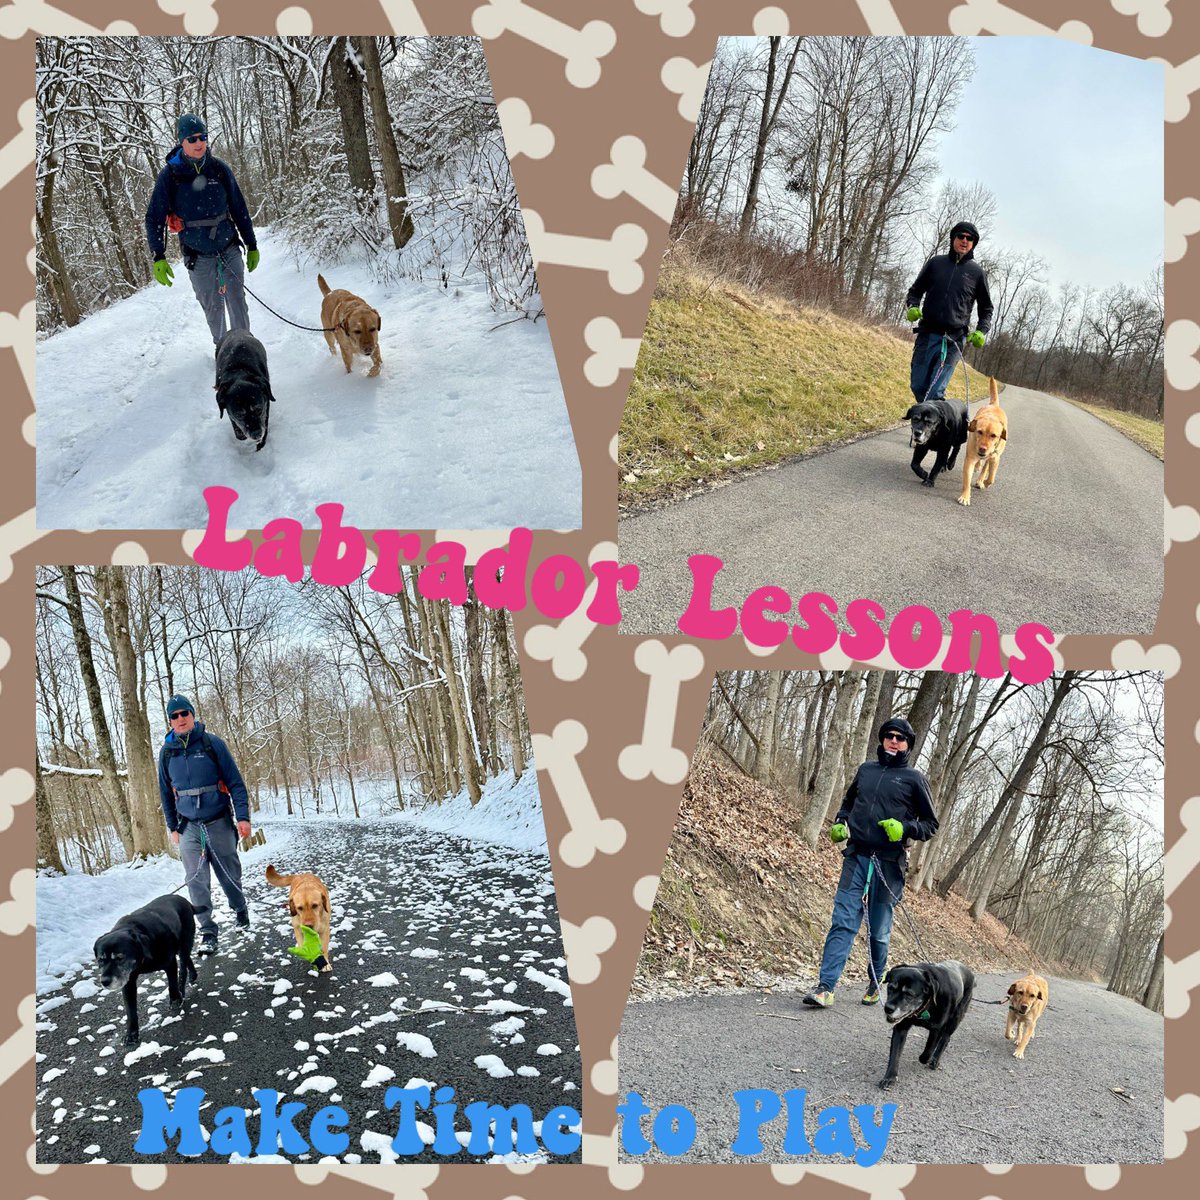 #LabradorLesson from #FitLabPGH (link below): Make time to play. Whether you’re enjoying the end of a long weekend or kicking off a new week, include #playtime in your #movement routine!

#MoveMore #HaveFunWithIt #PlayMore 

tinyurl.com/FLP-LabsPlay